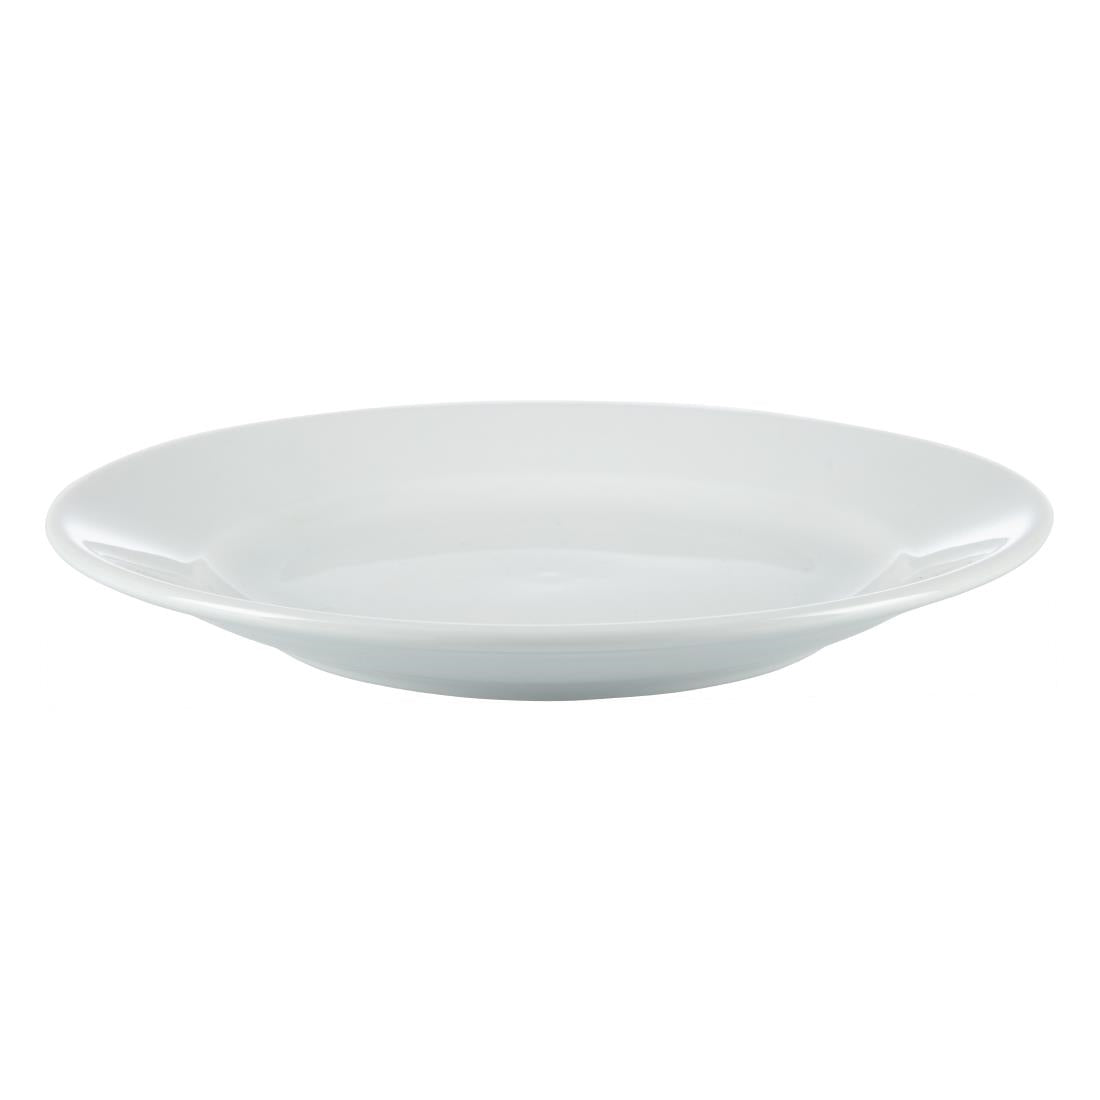 CB478 Olympia Whiteware Wide Rimmed Plates 165mm (Pack of 12)